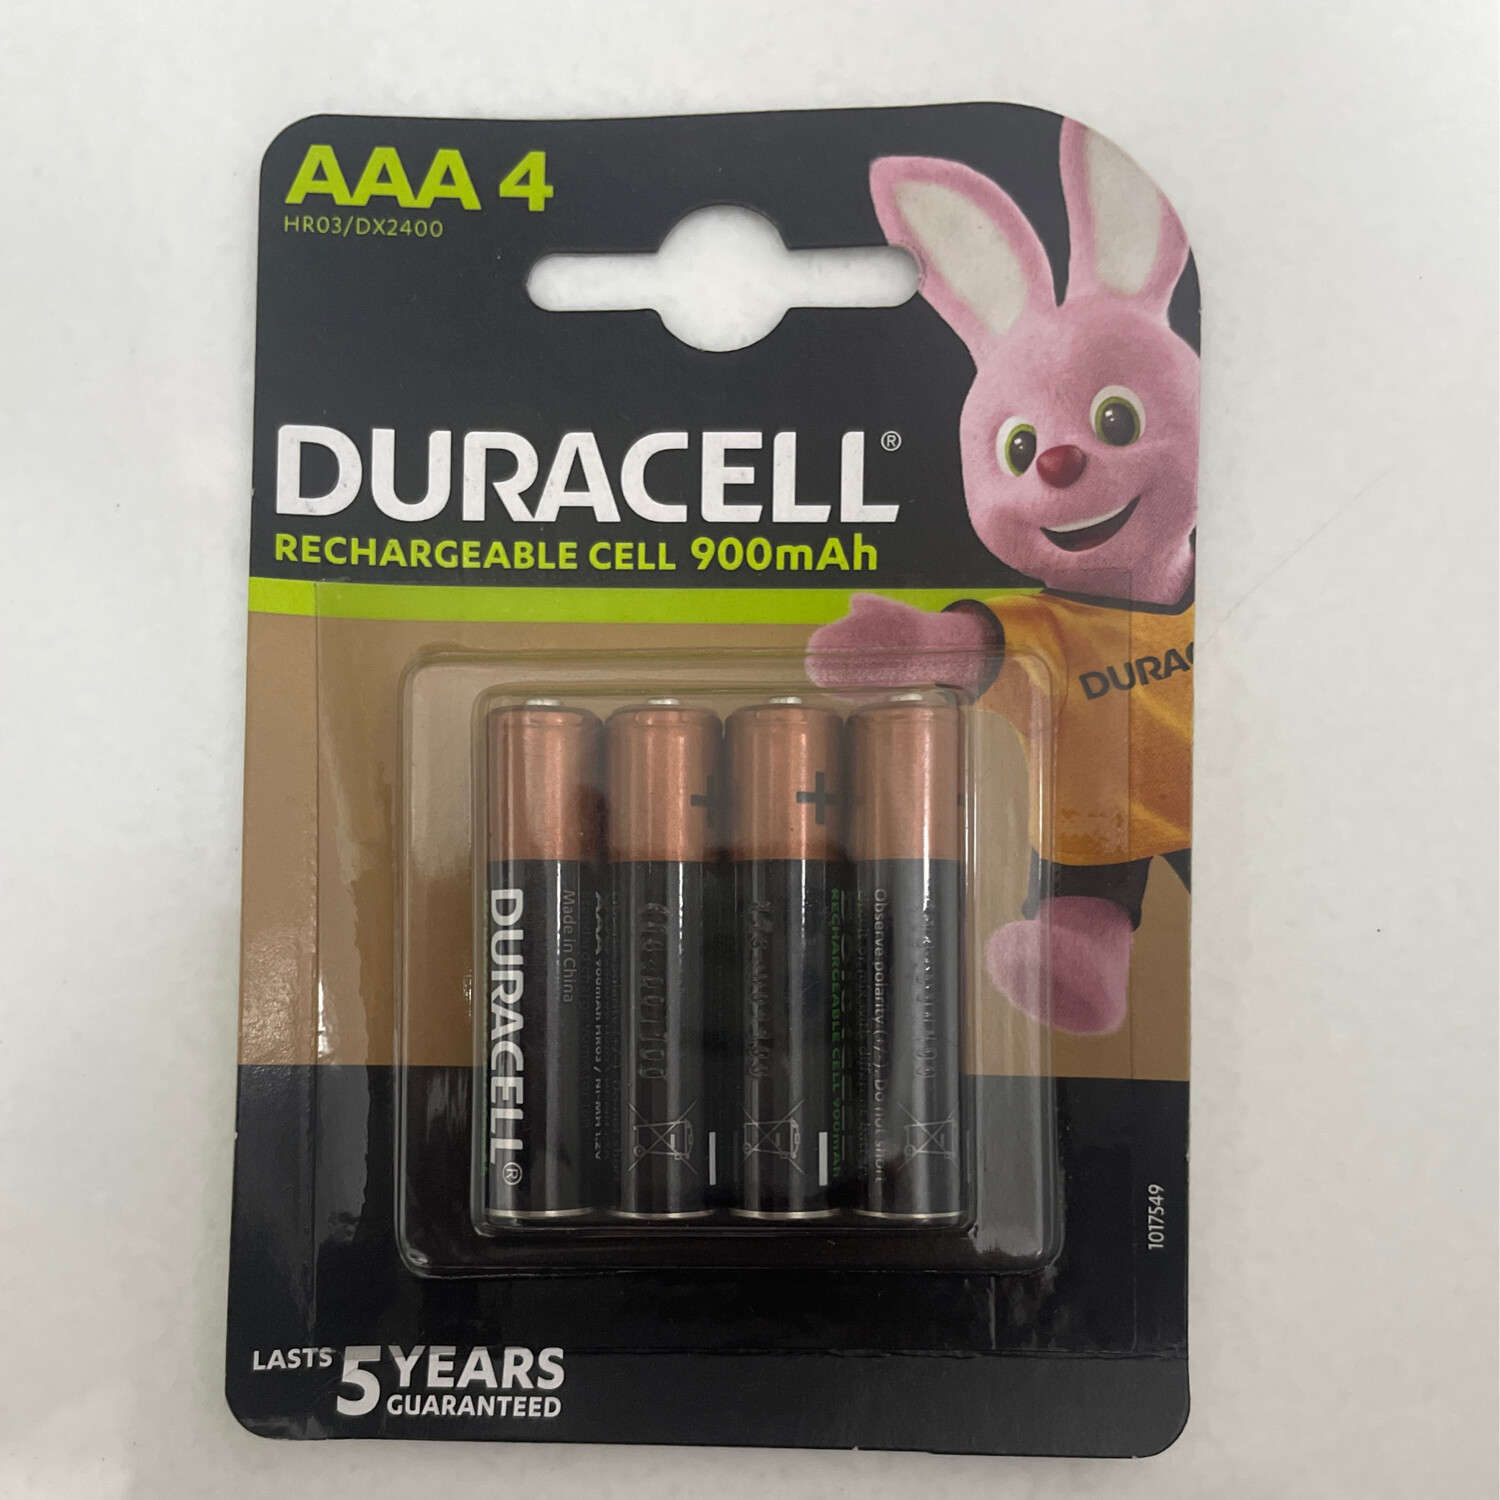 Duracell AAA, 4, Battery, 900mAh, Rechargeable